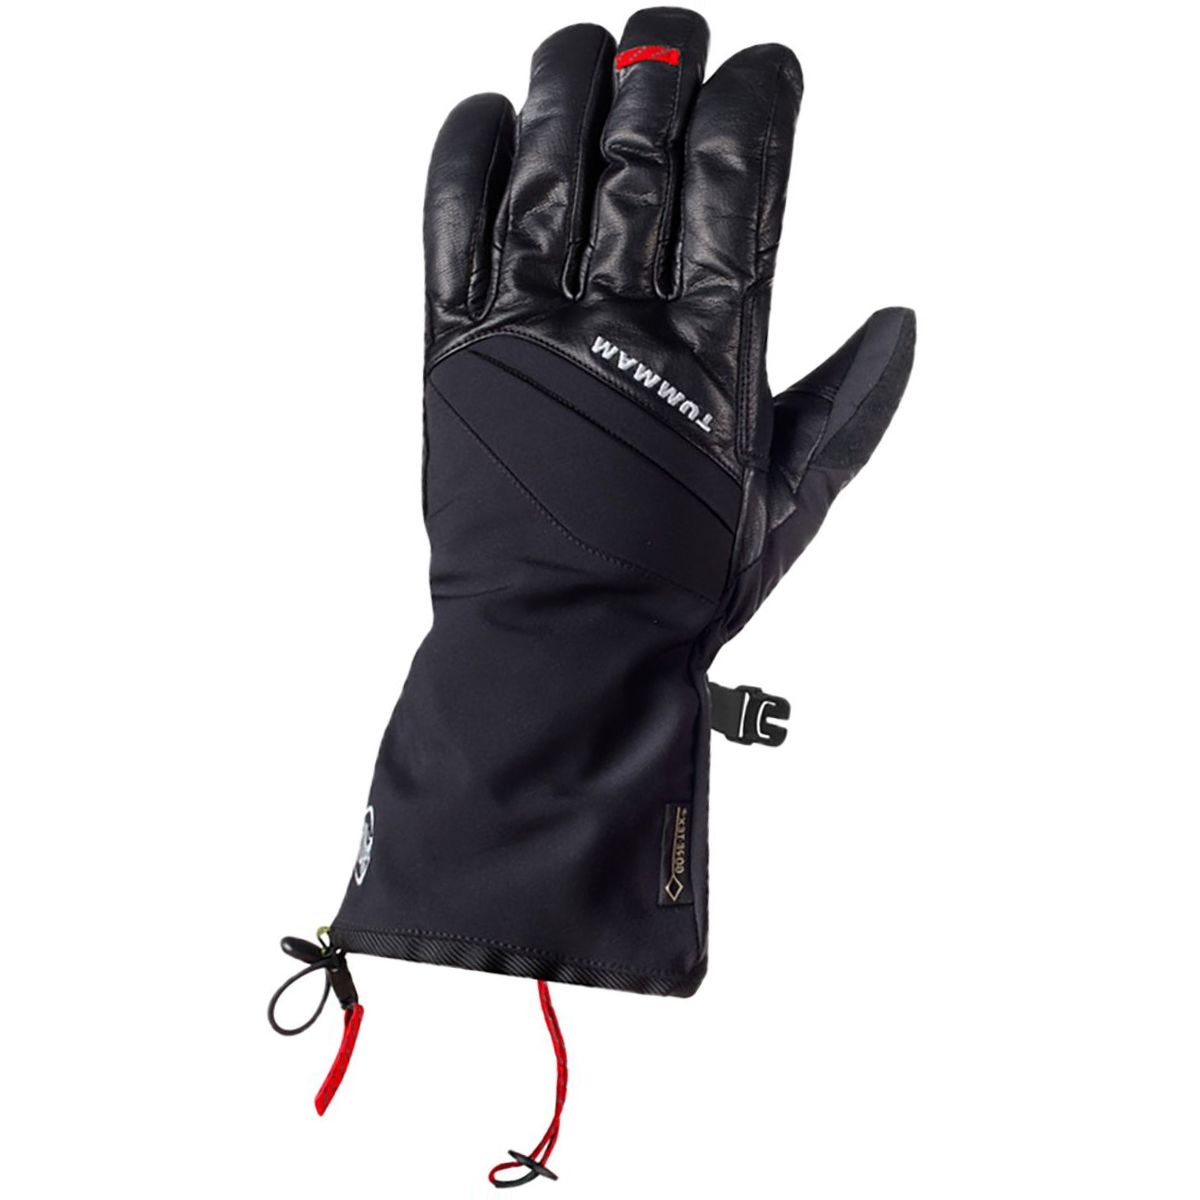 Mammut Meron Thermo 2-In-1 Glove - Men's